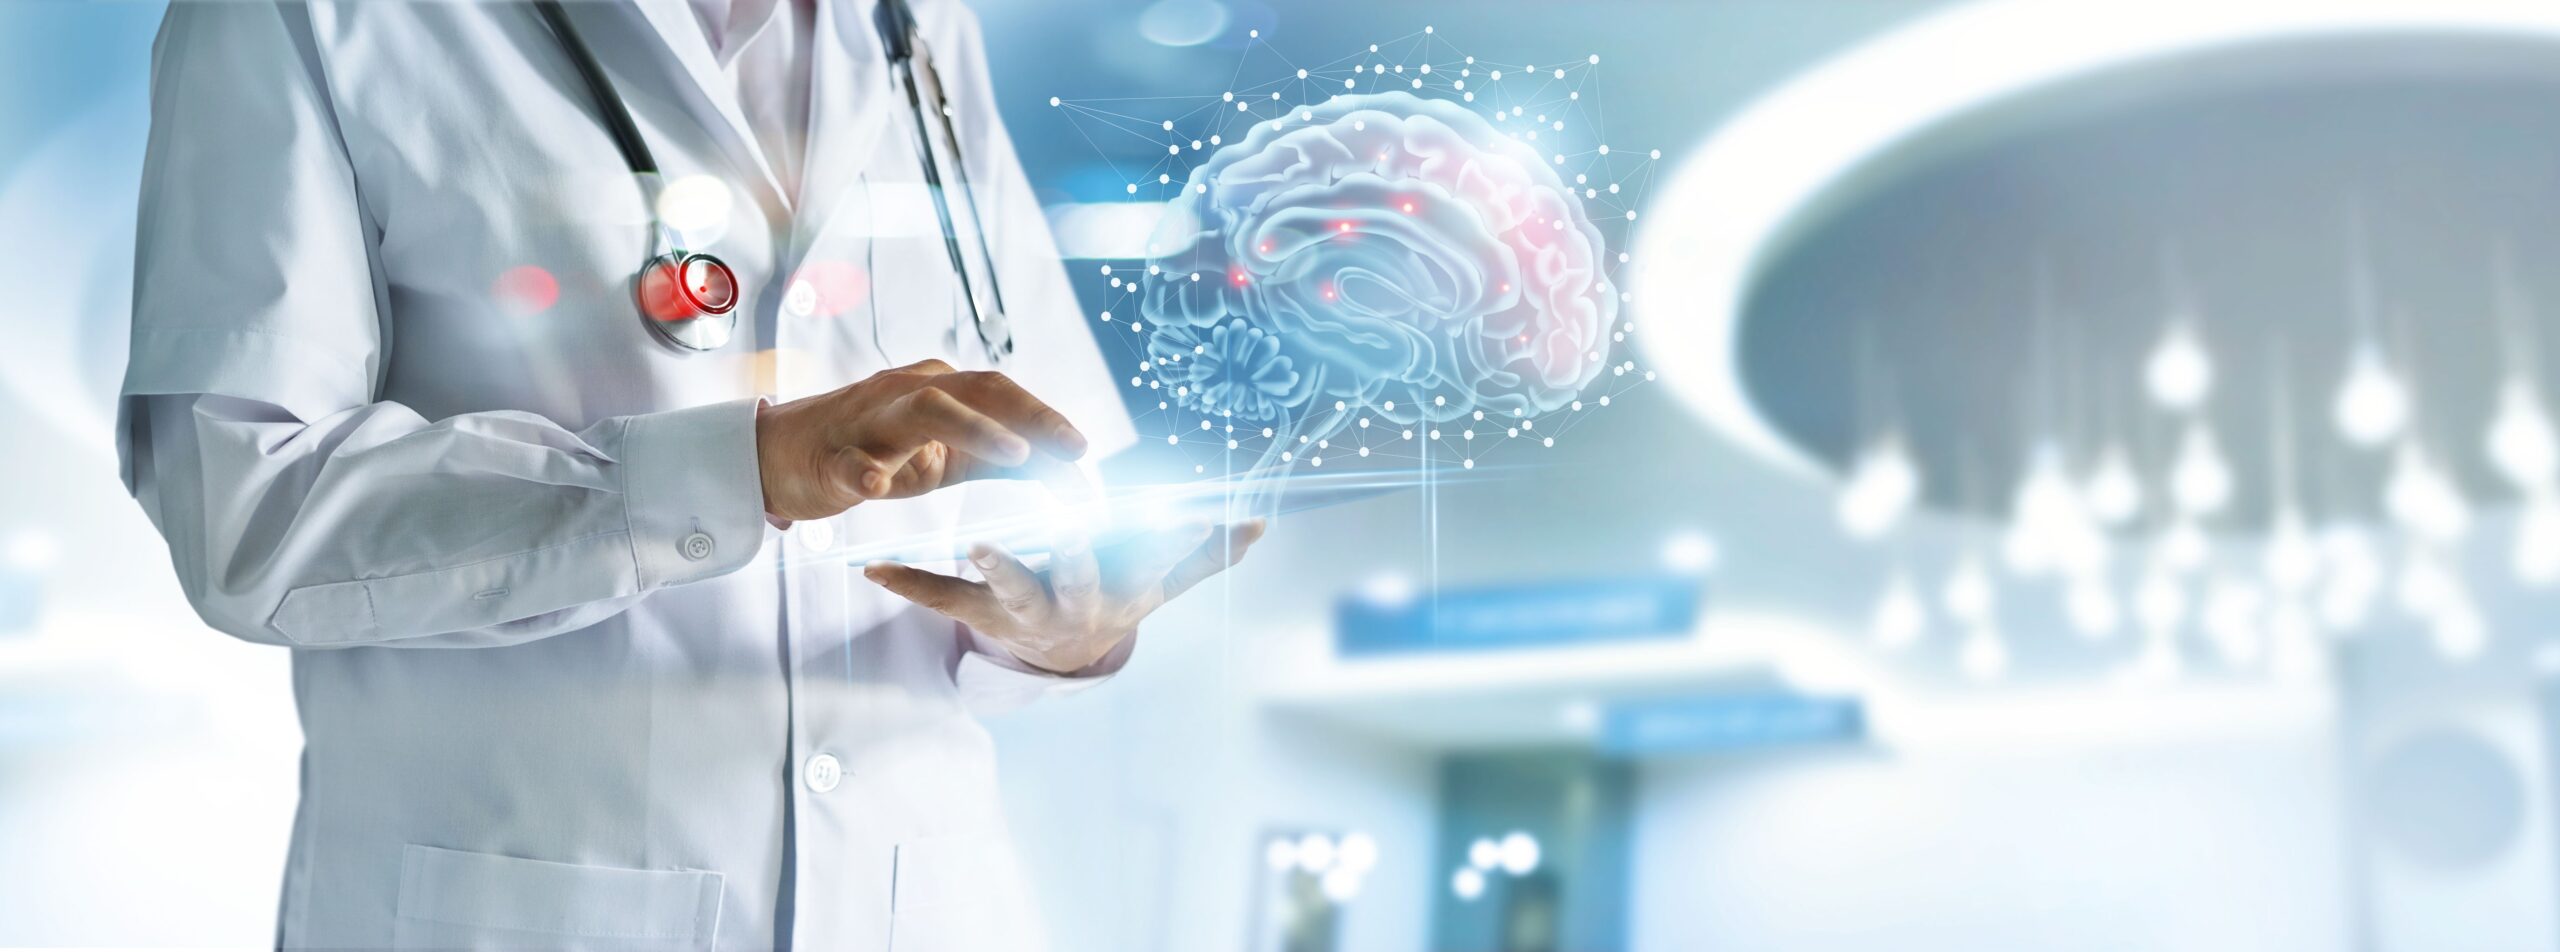 Proceeding with Caution: The Impact of (Generative) AI on Healthcare and Life Sciences | Healthcare IT Today